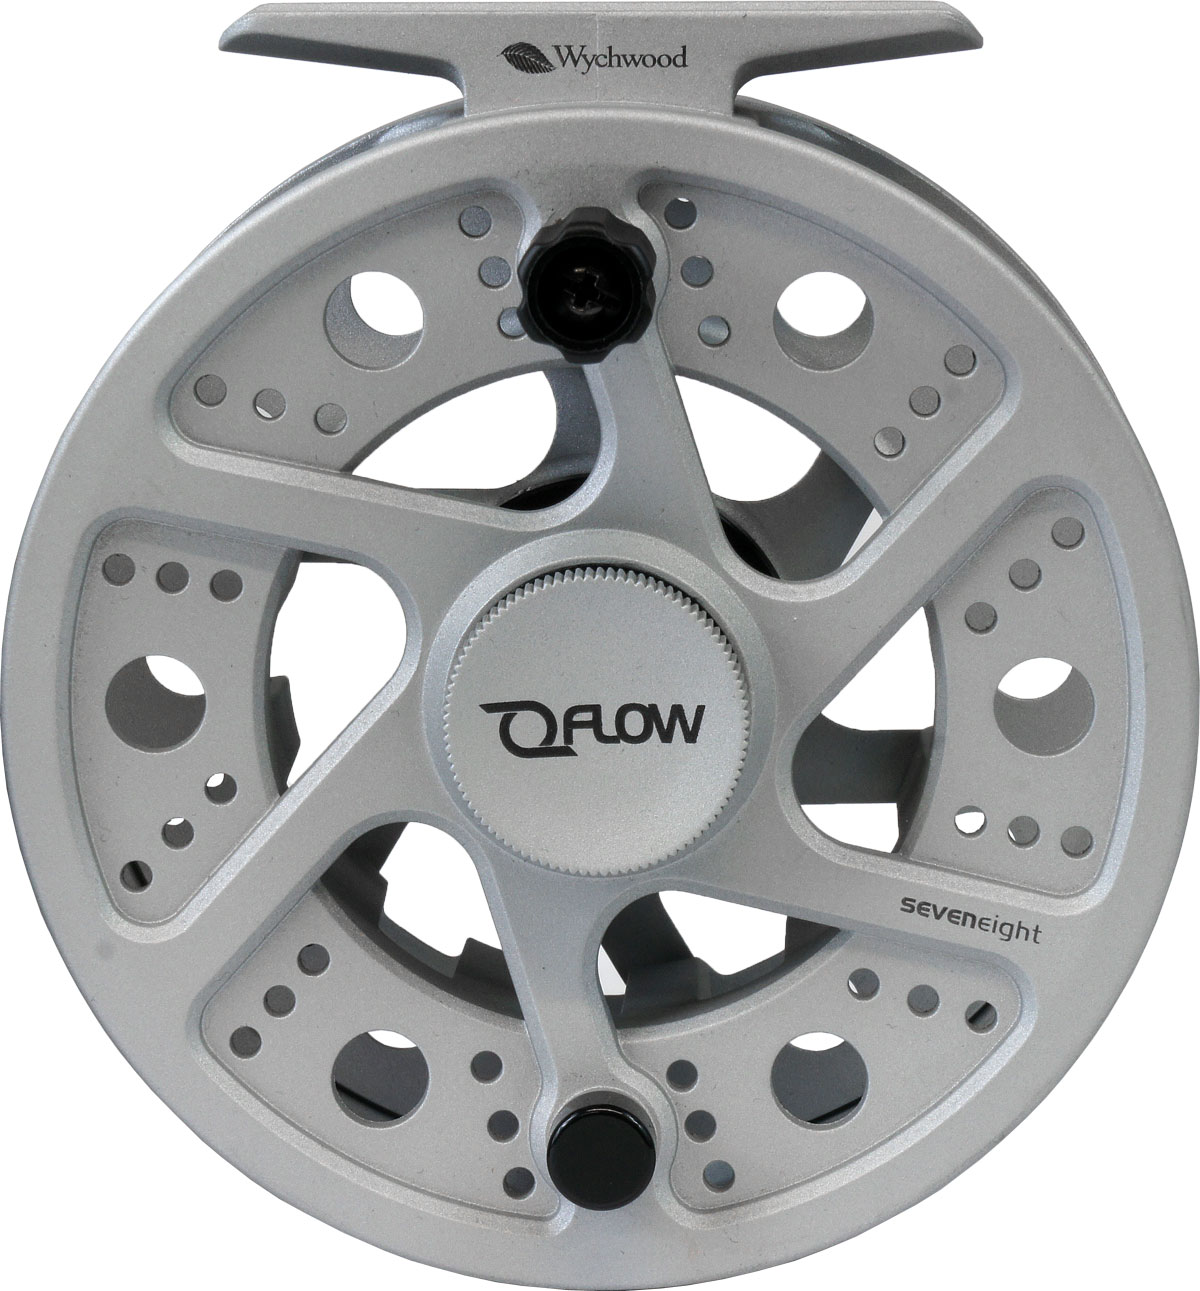 DRESS Reel Stand Rook [For Daiwa] Titanium Silver Reels buy at